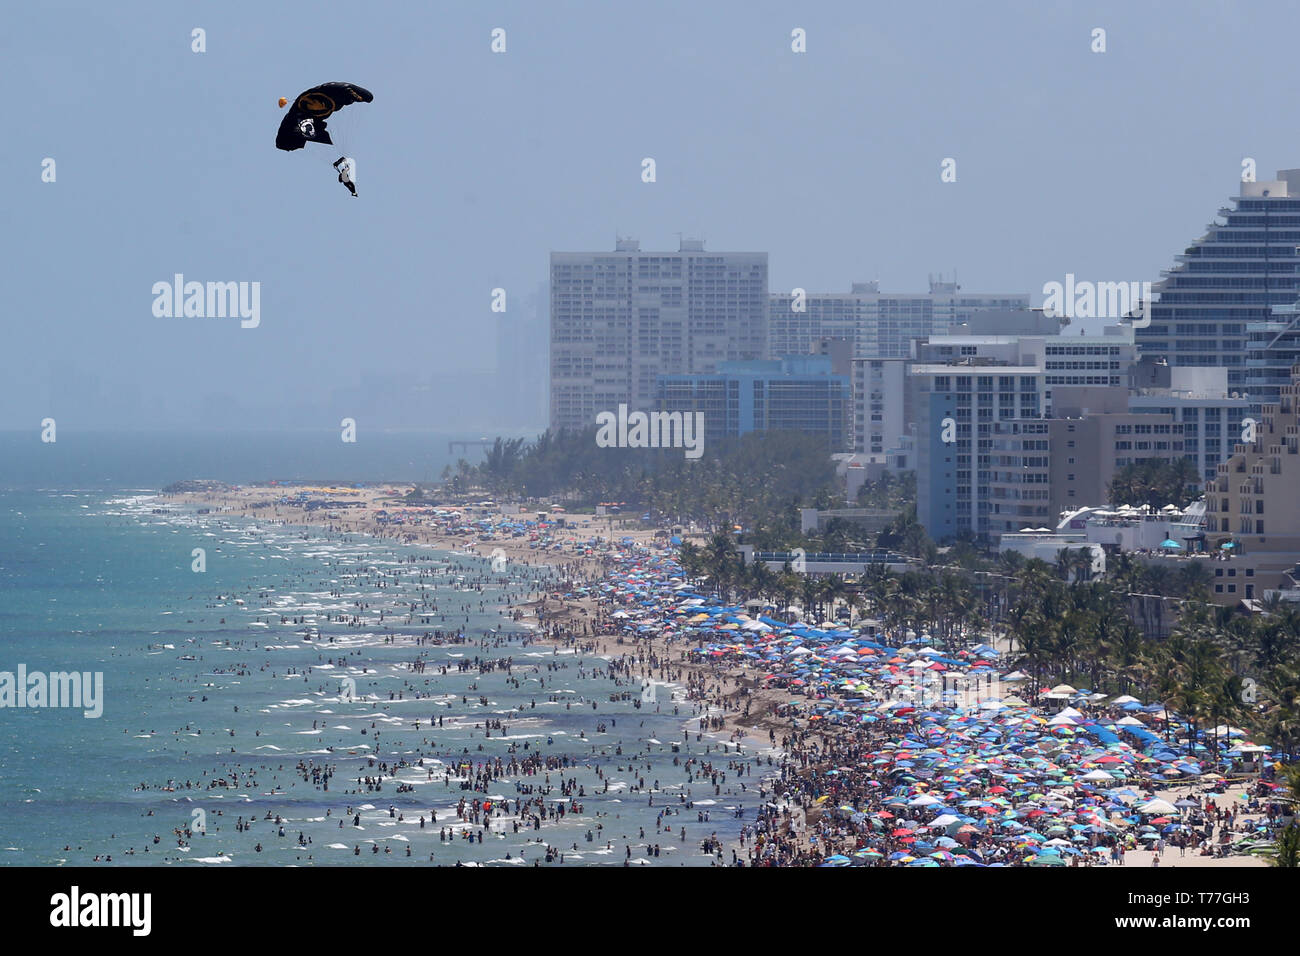 Florida, USA. 04th May, 2019. SOCOM Para-Commandos performs in the Fort Lauderdale Air Show on May 4, 2019 in Fort Lauderdale, Florida   People:  SOCOM Para-Commandos Credit: Storms Media Group/Alamy Live News Stock Photo